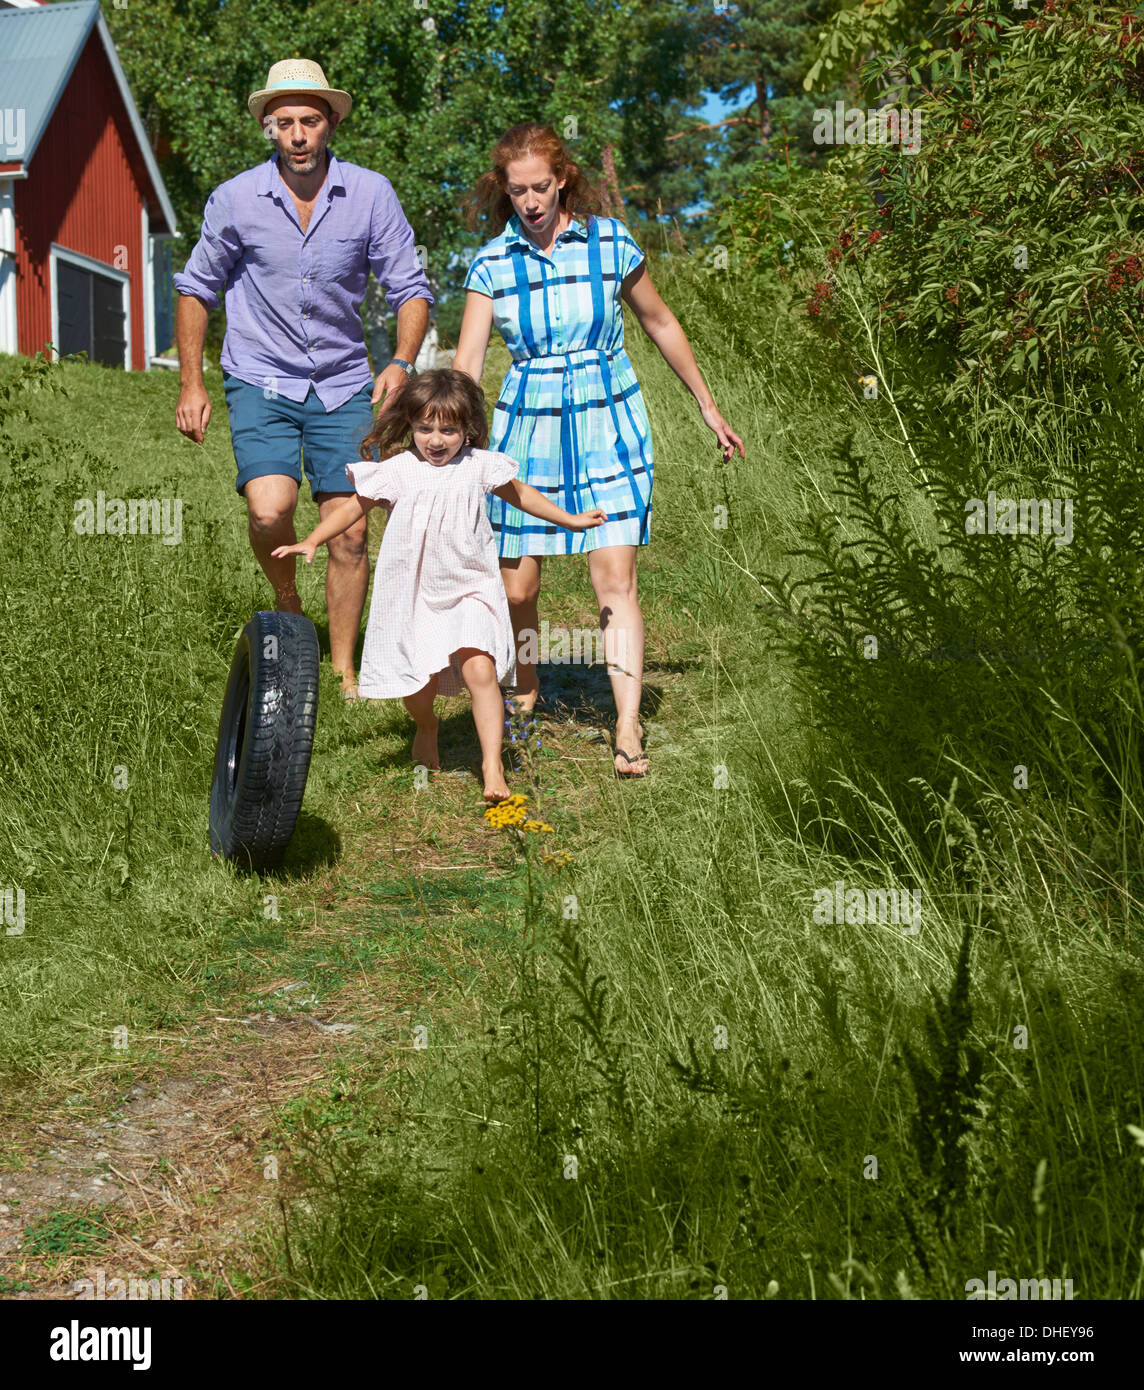 Parents and girl rolling tyre on path, Utvalnas, Gavle, Sweden Stock Photo